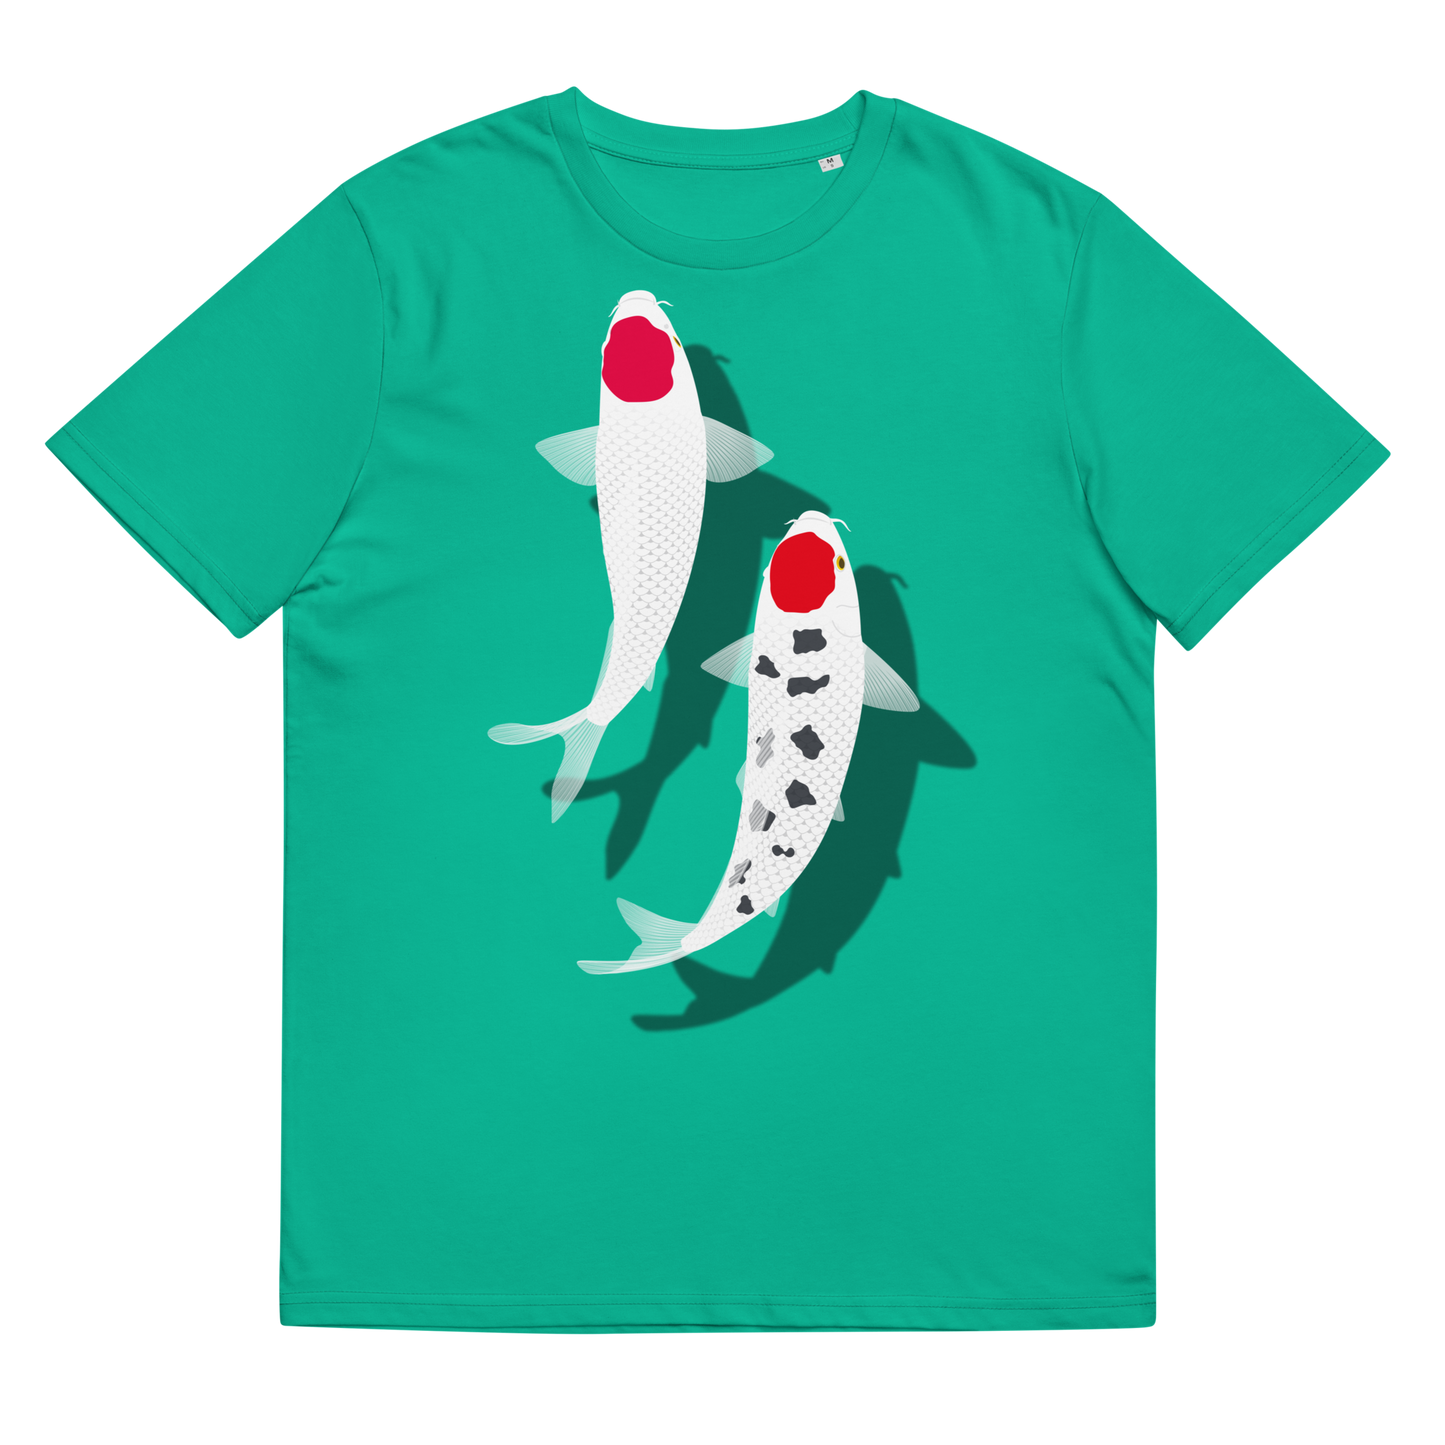 [Koi] T-shirt tancho red and white (unisex)